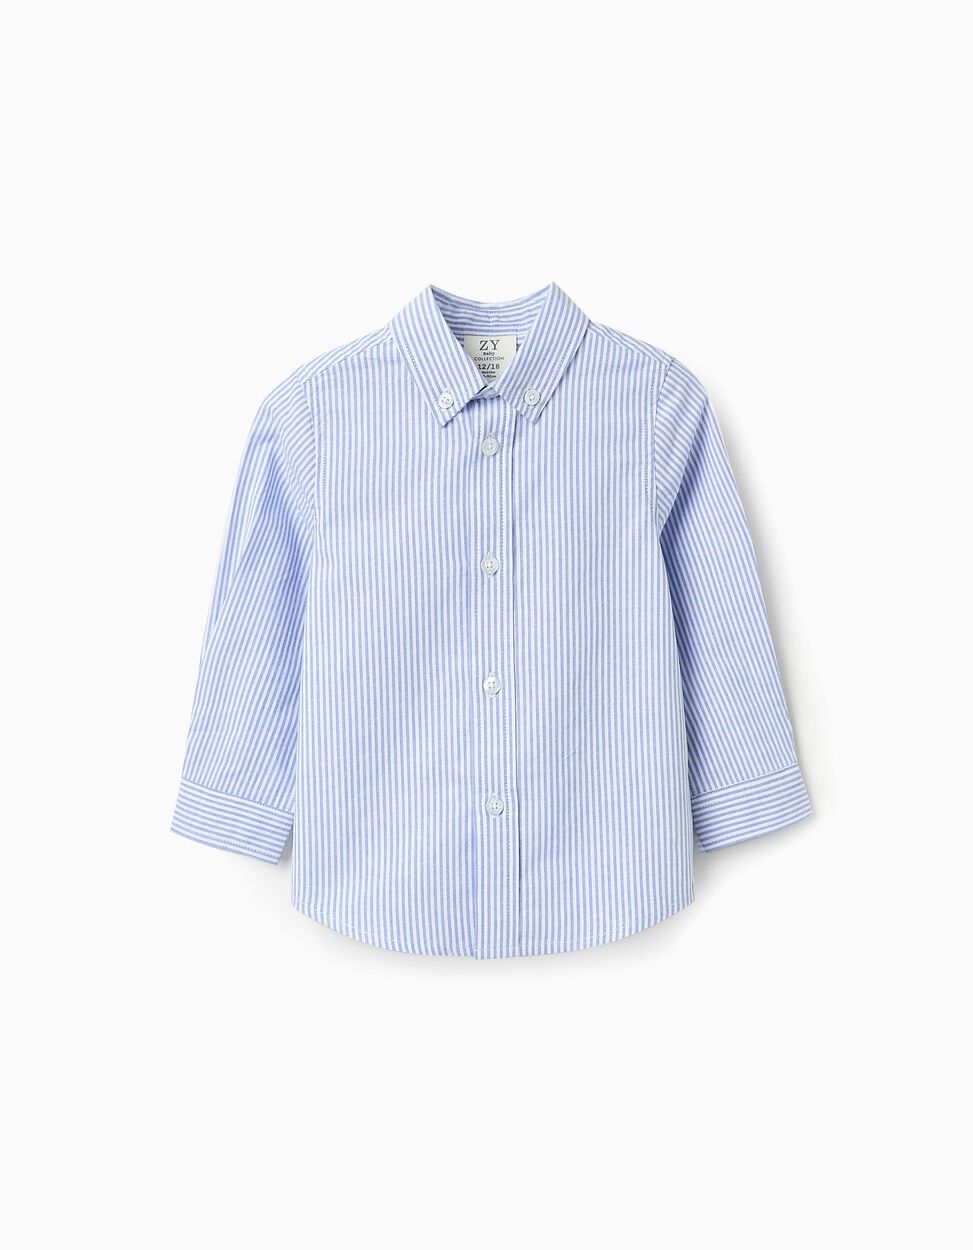 Buy Online Cotton Striped Shirt for Baby Boys, White/Blue